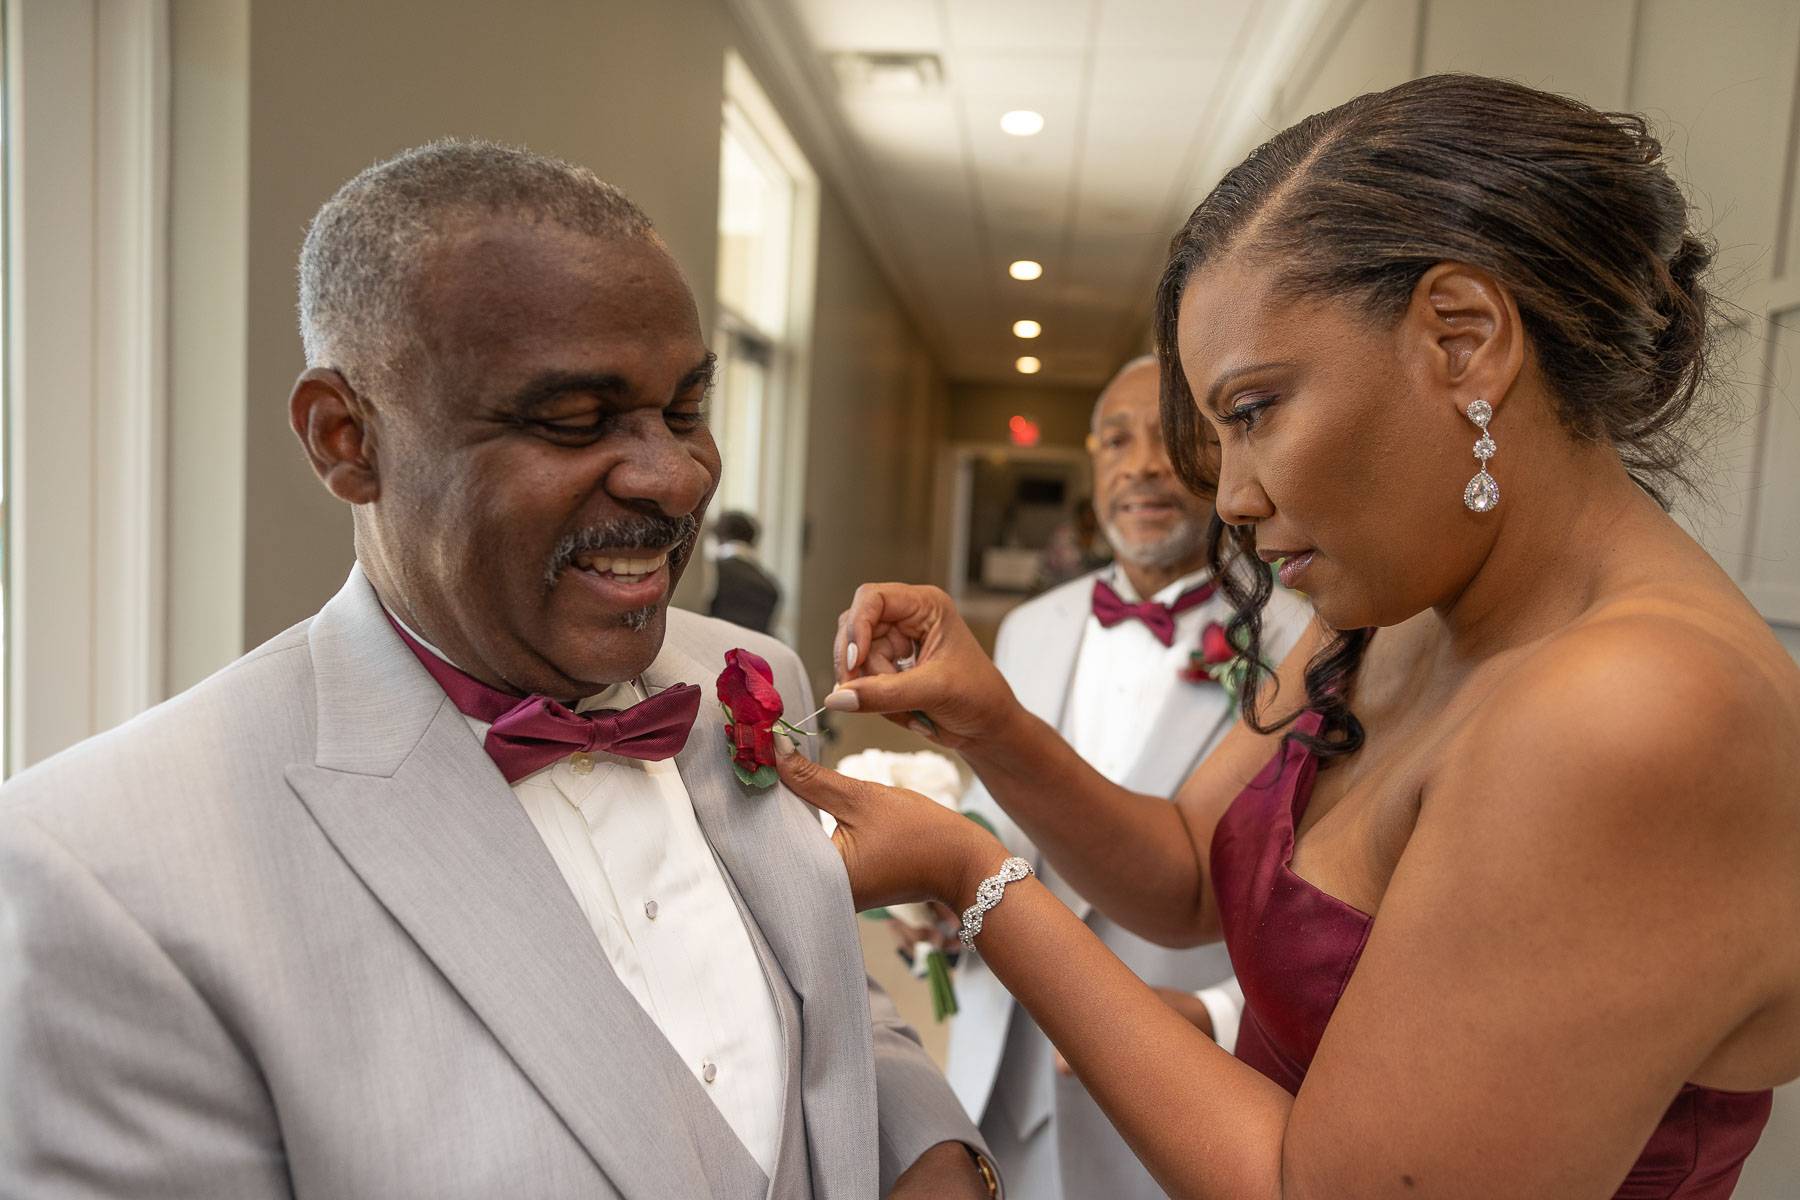 A woman fixing a man’s boutonniere